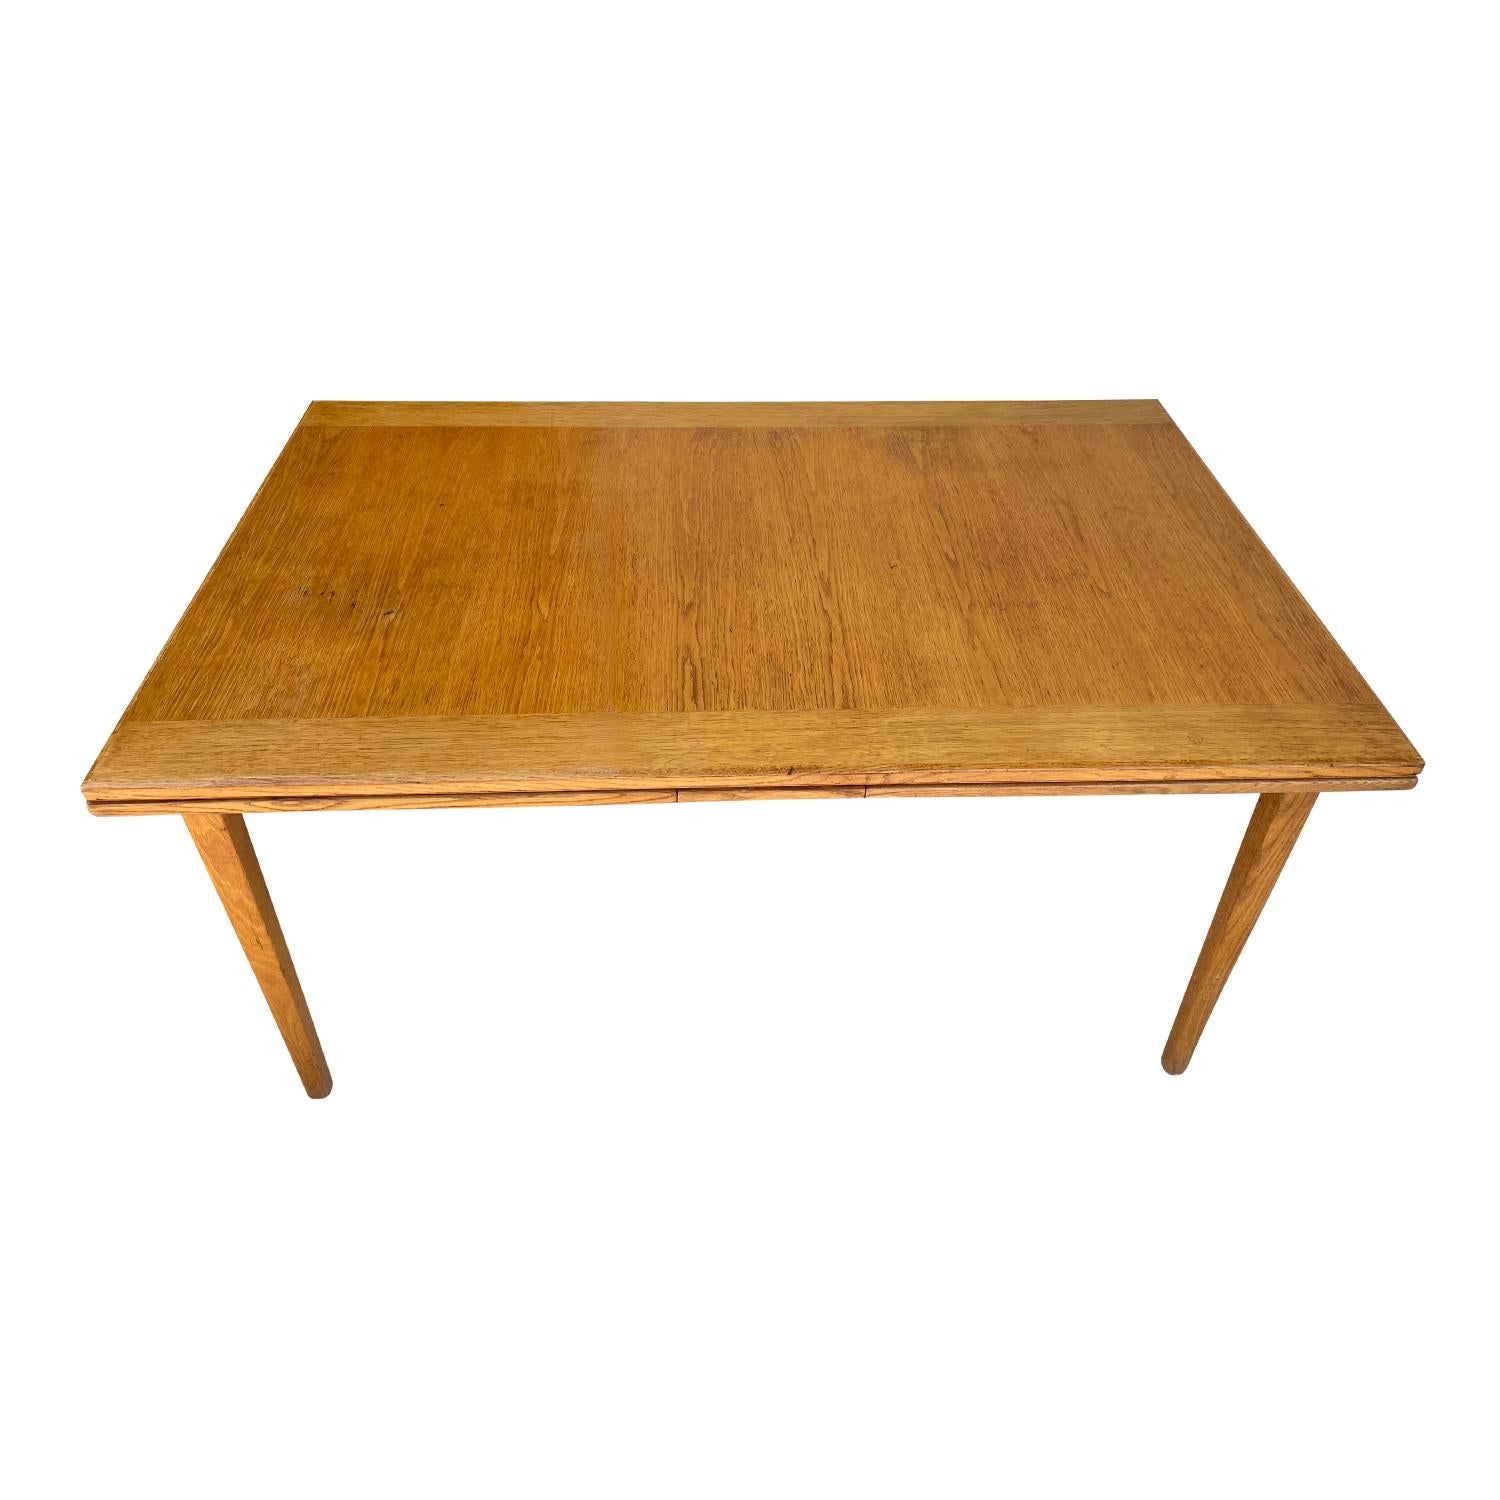 20th Century Swedish Mid-Century Extendable Walnut Dining Table by Carl Malmsten For Sale 2